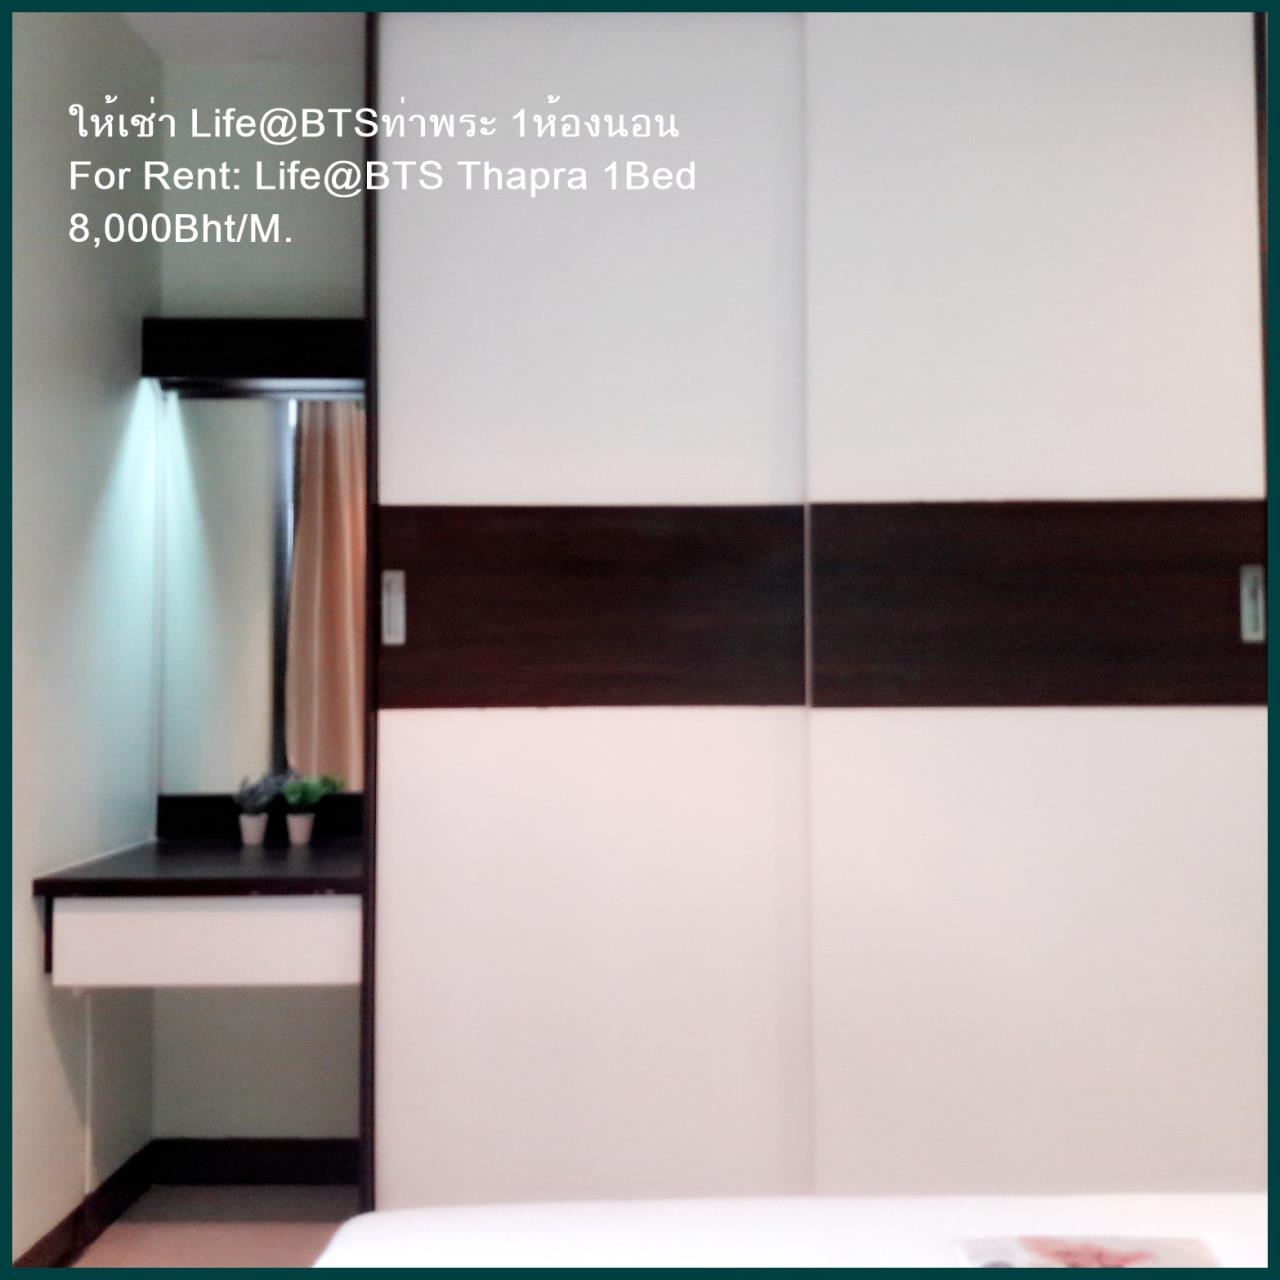 Ta (+66 9 5935 1592) Agency's For Rent condo at BTS Tha Phra 1 Bedroom fully furnished 7,500B/m near Talad Plu and Sathorn, clean and good condotion. 8